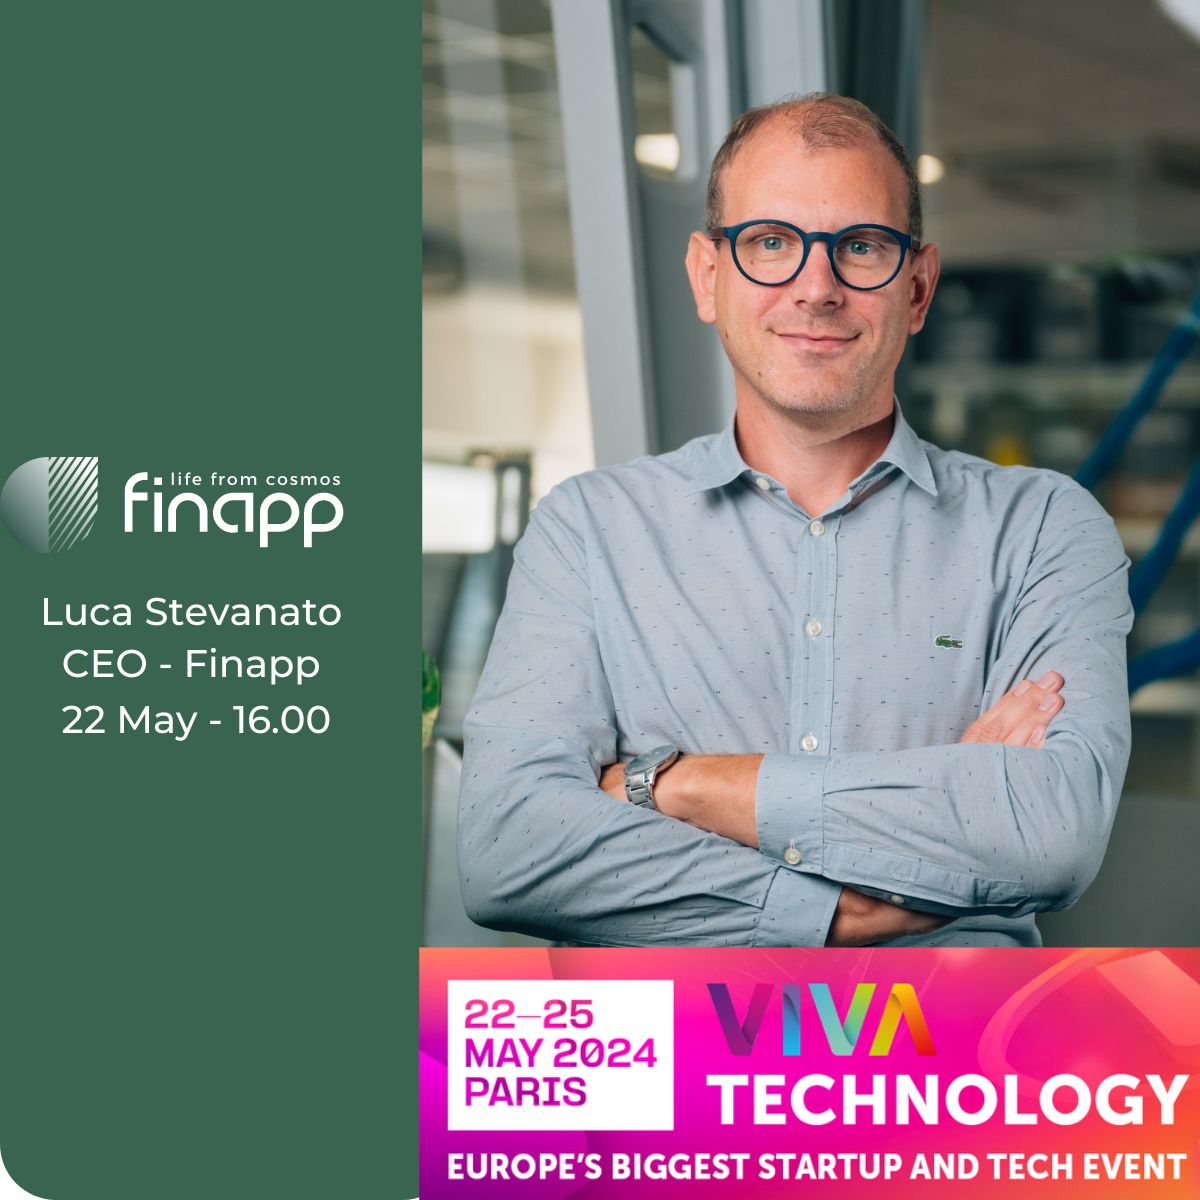 💡 Are you ready to know a cosmic reality at @VivaTech ? Finapp can't wait to surprise you at booth C11-033! 🔊The surprises are not over. We hear from our CEO Luca Stevanato Pitch on 22 May at 4pm! #Innovation #VivaTech #ViVATECh24 #Startup